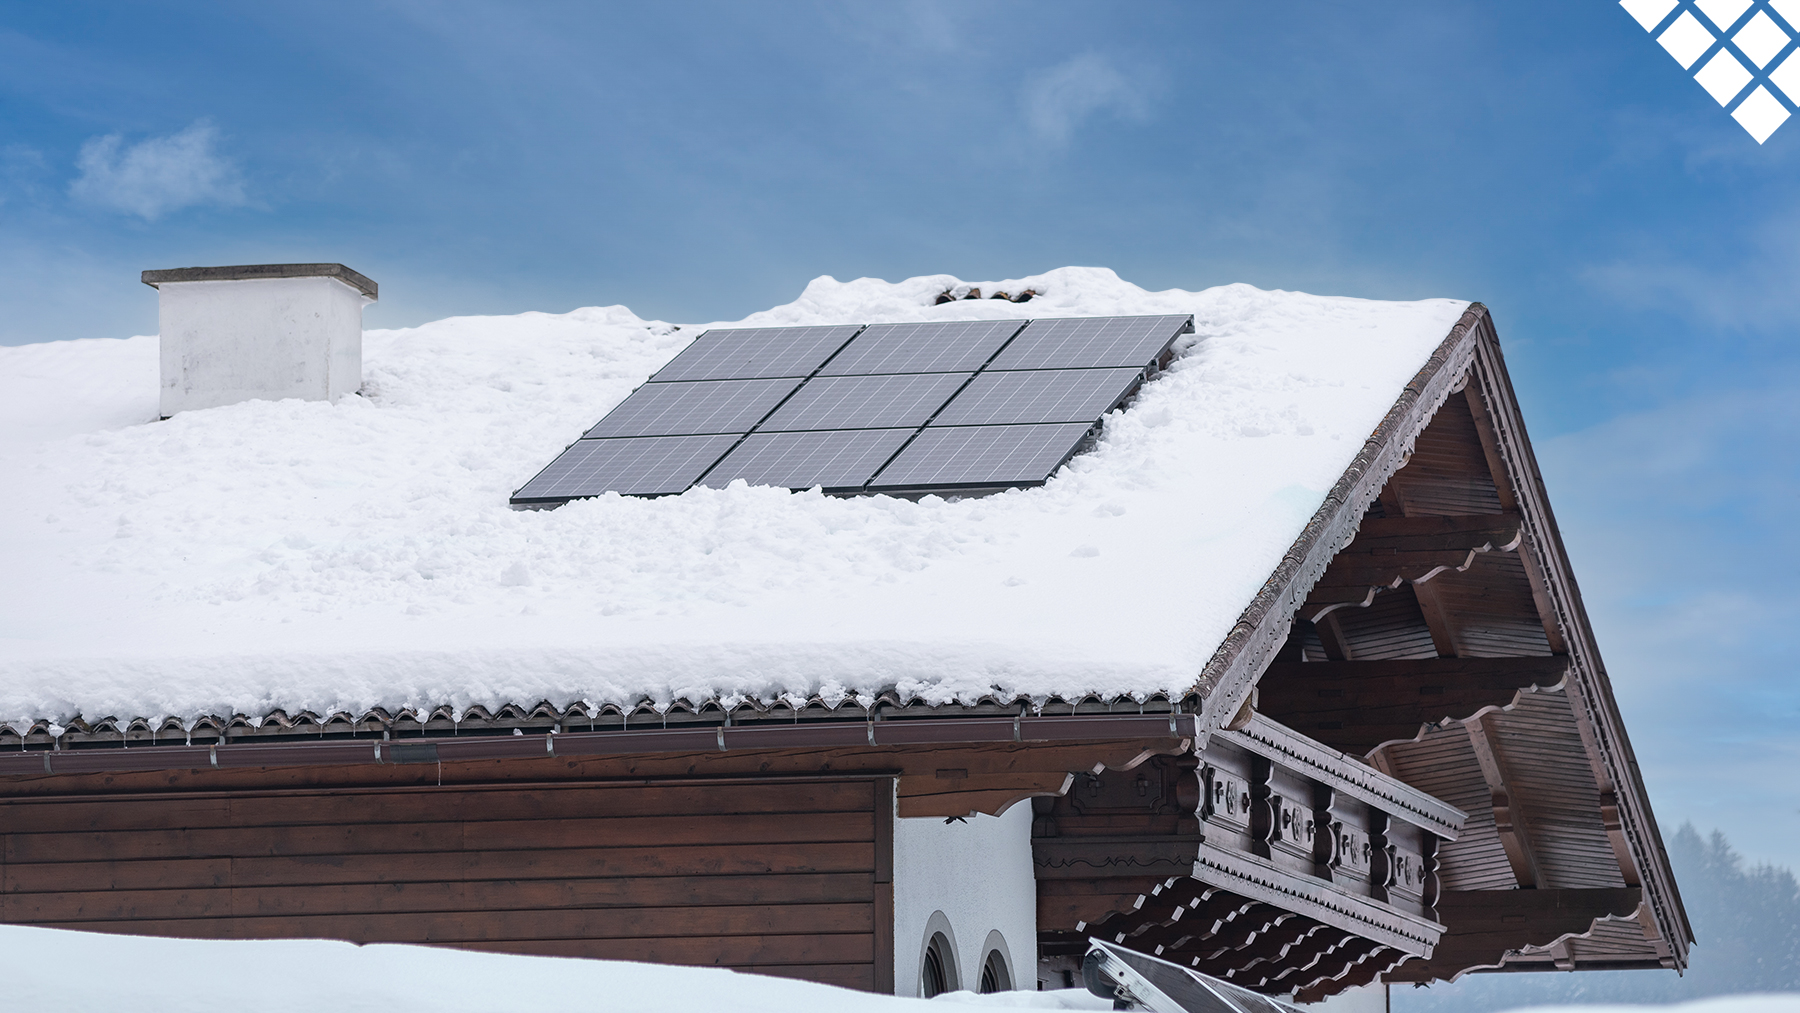 House with snow on roof and solar panels